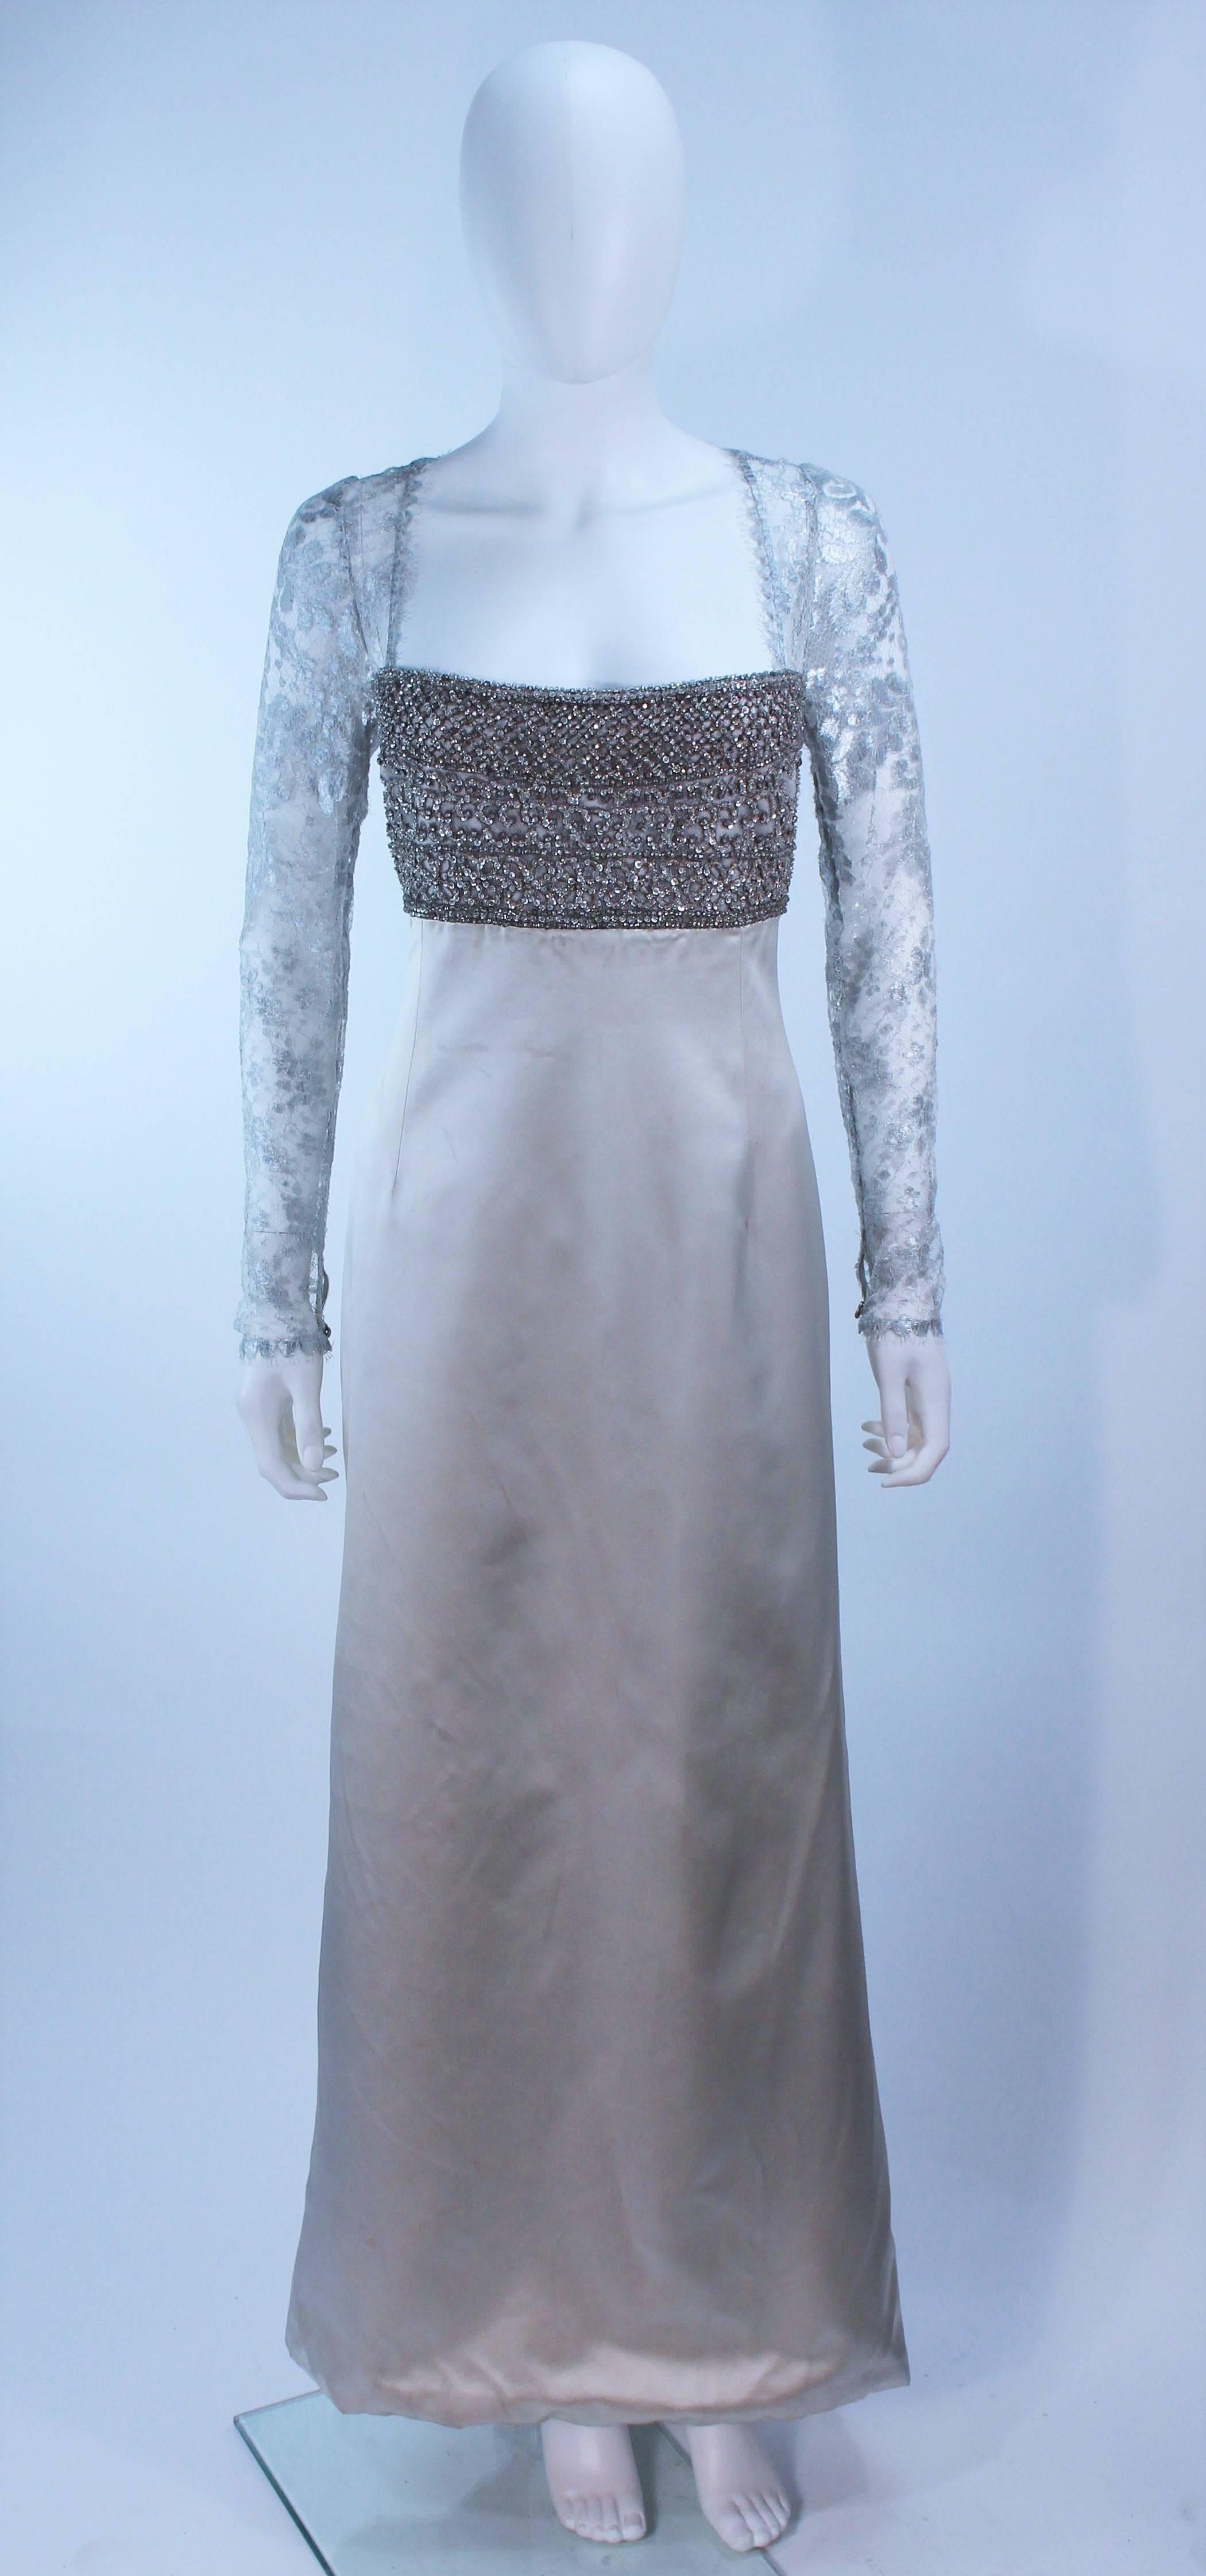 This Badgley Mischka dgown is composed of a silver lace with satin skirt, and a beaded bodice. Features a sheer lace metallic sleeves. There is a center back zipper closure. In excellent pre-owned condition.

  **Please cross-reference